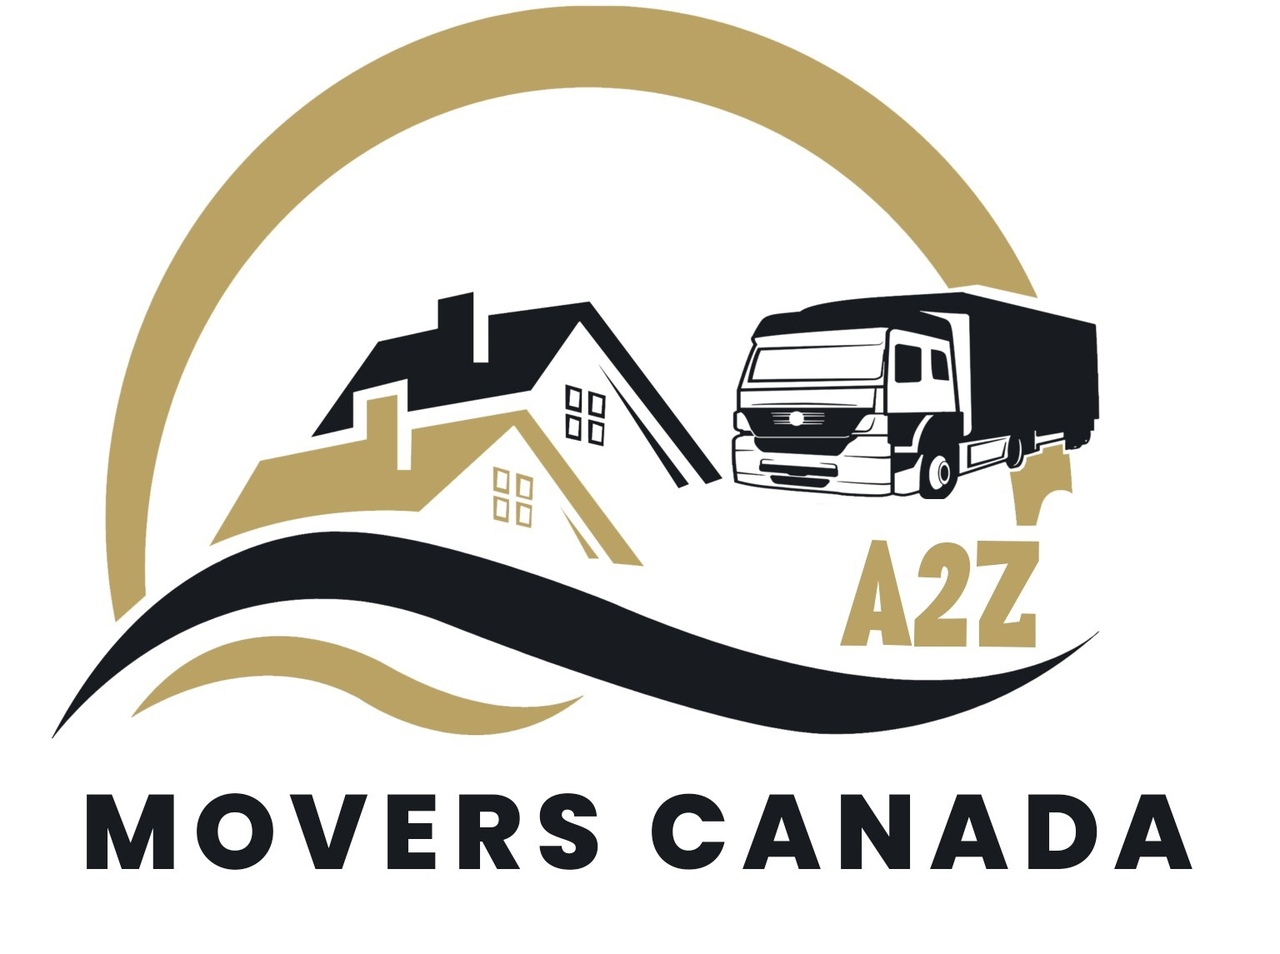 A2Z Movers 's logo